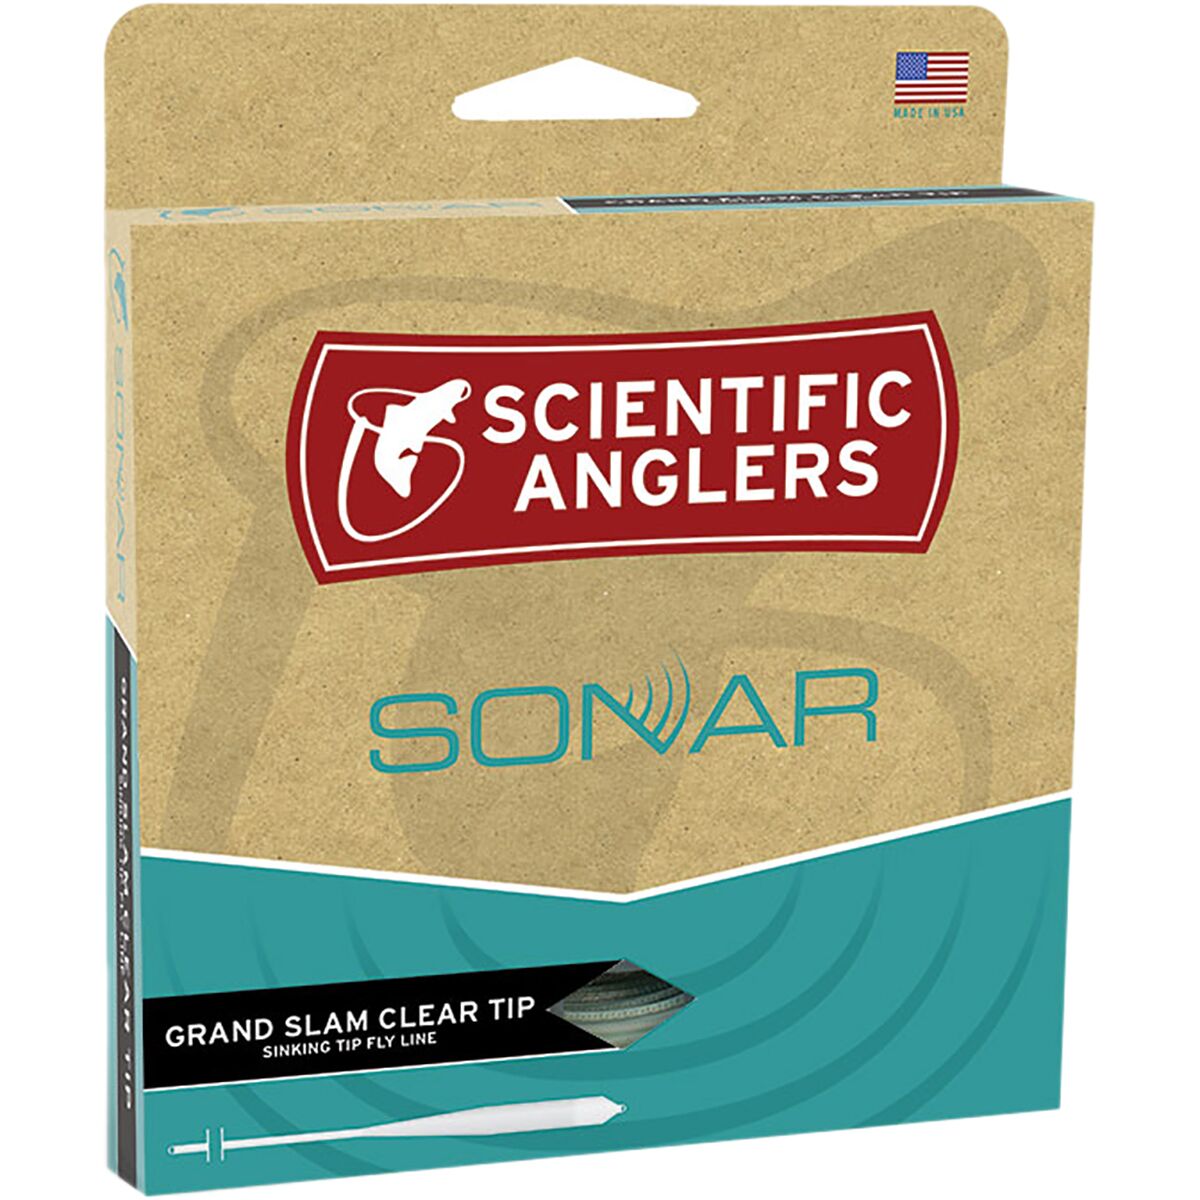 Scientific Anglers Sonar Grand Slam Clear Tip Fly Line